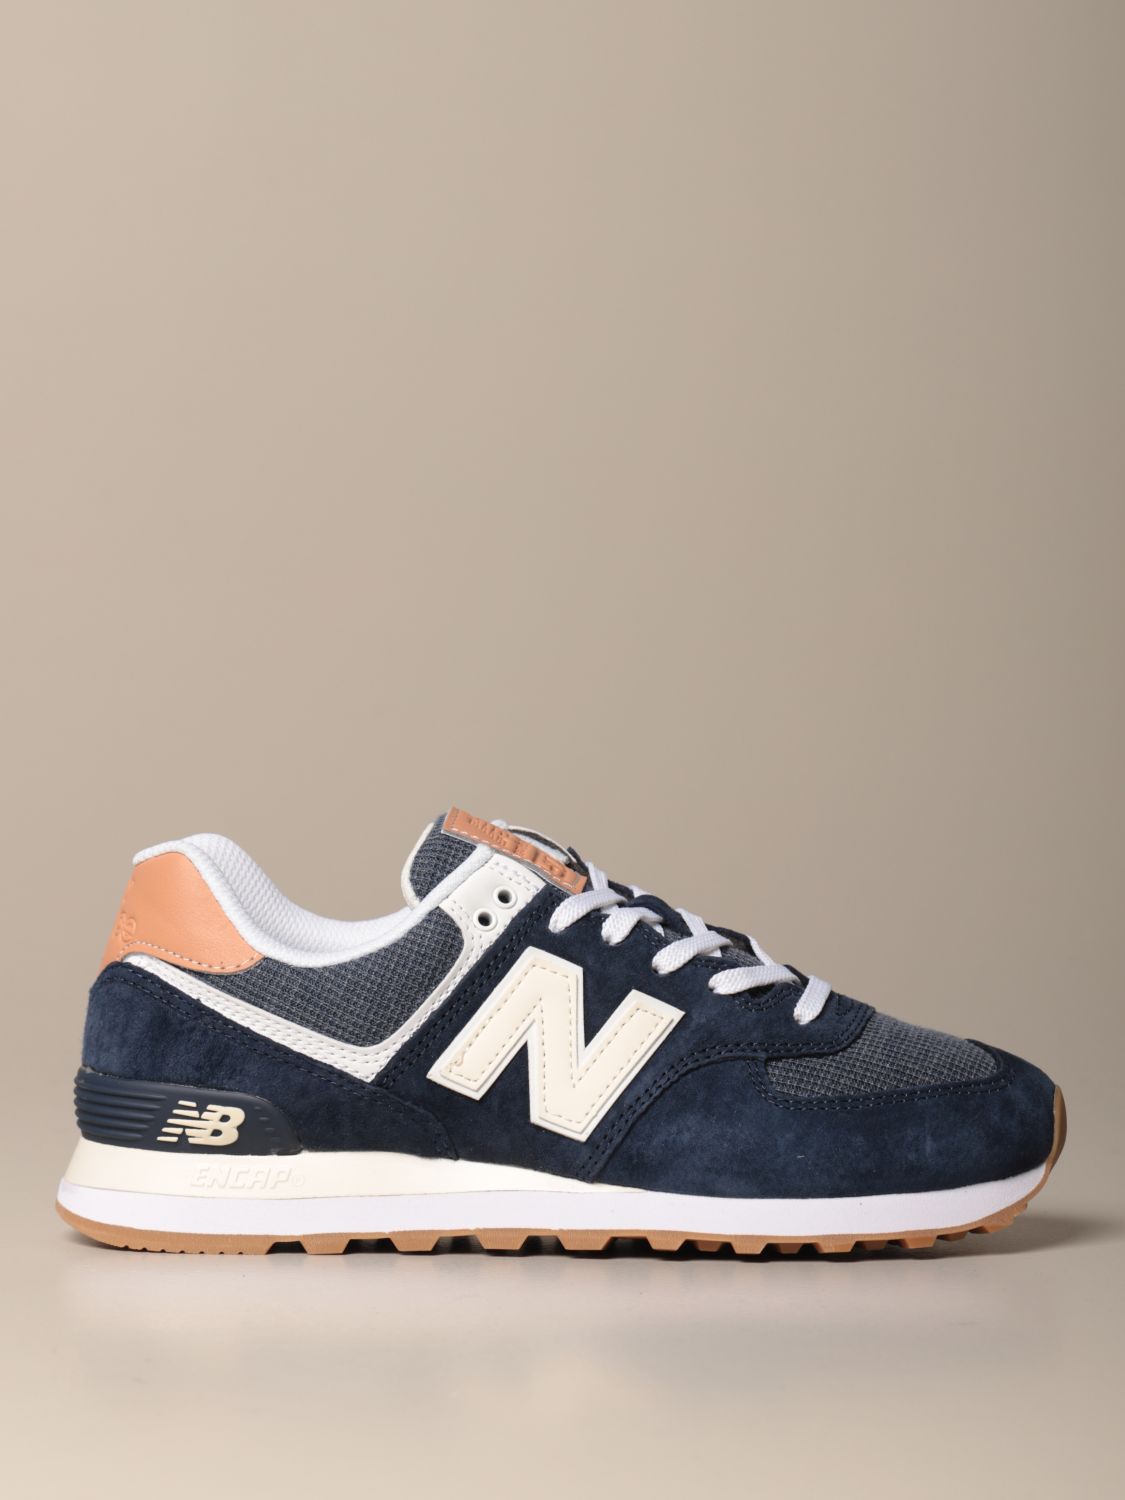 New Balance 574 sneakers in suede and knit